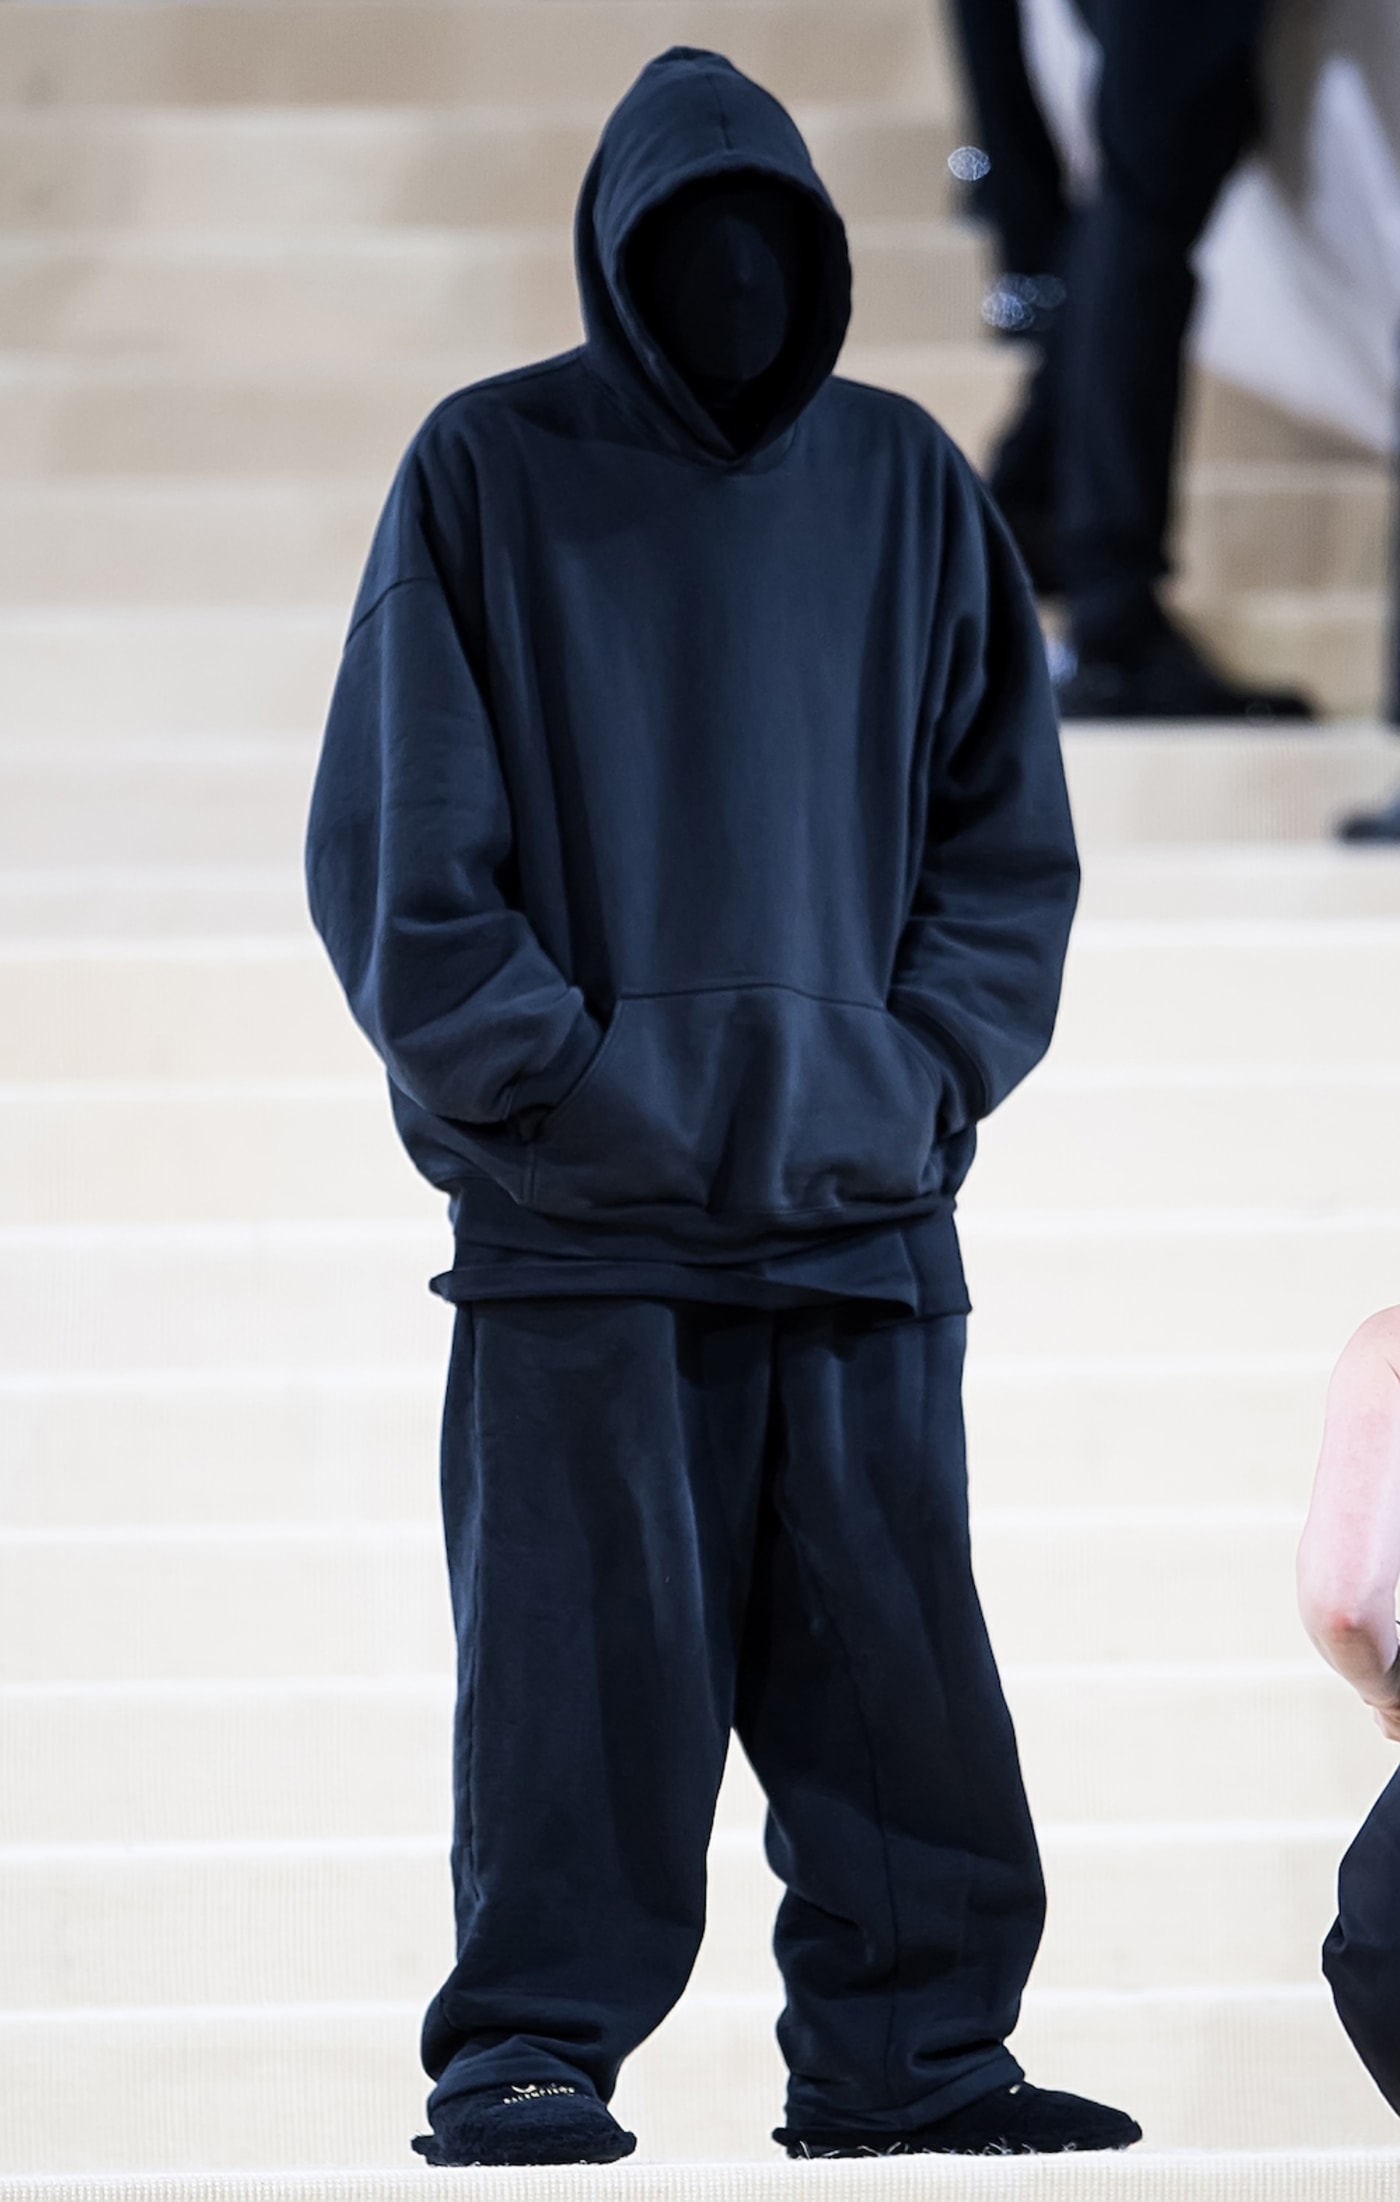 Kanye West Yeezy Gap x Balenciaga: What We Want To See | Complex